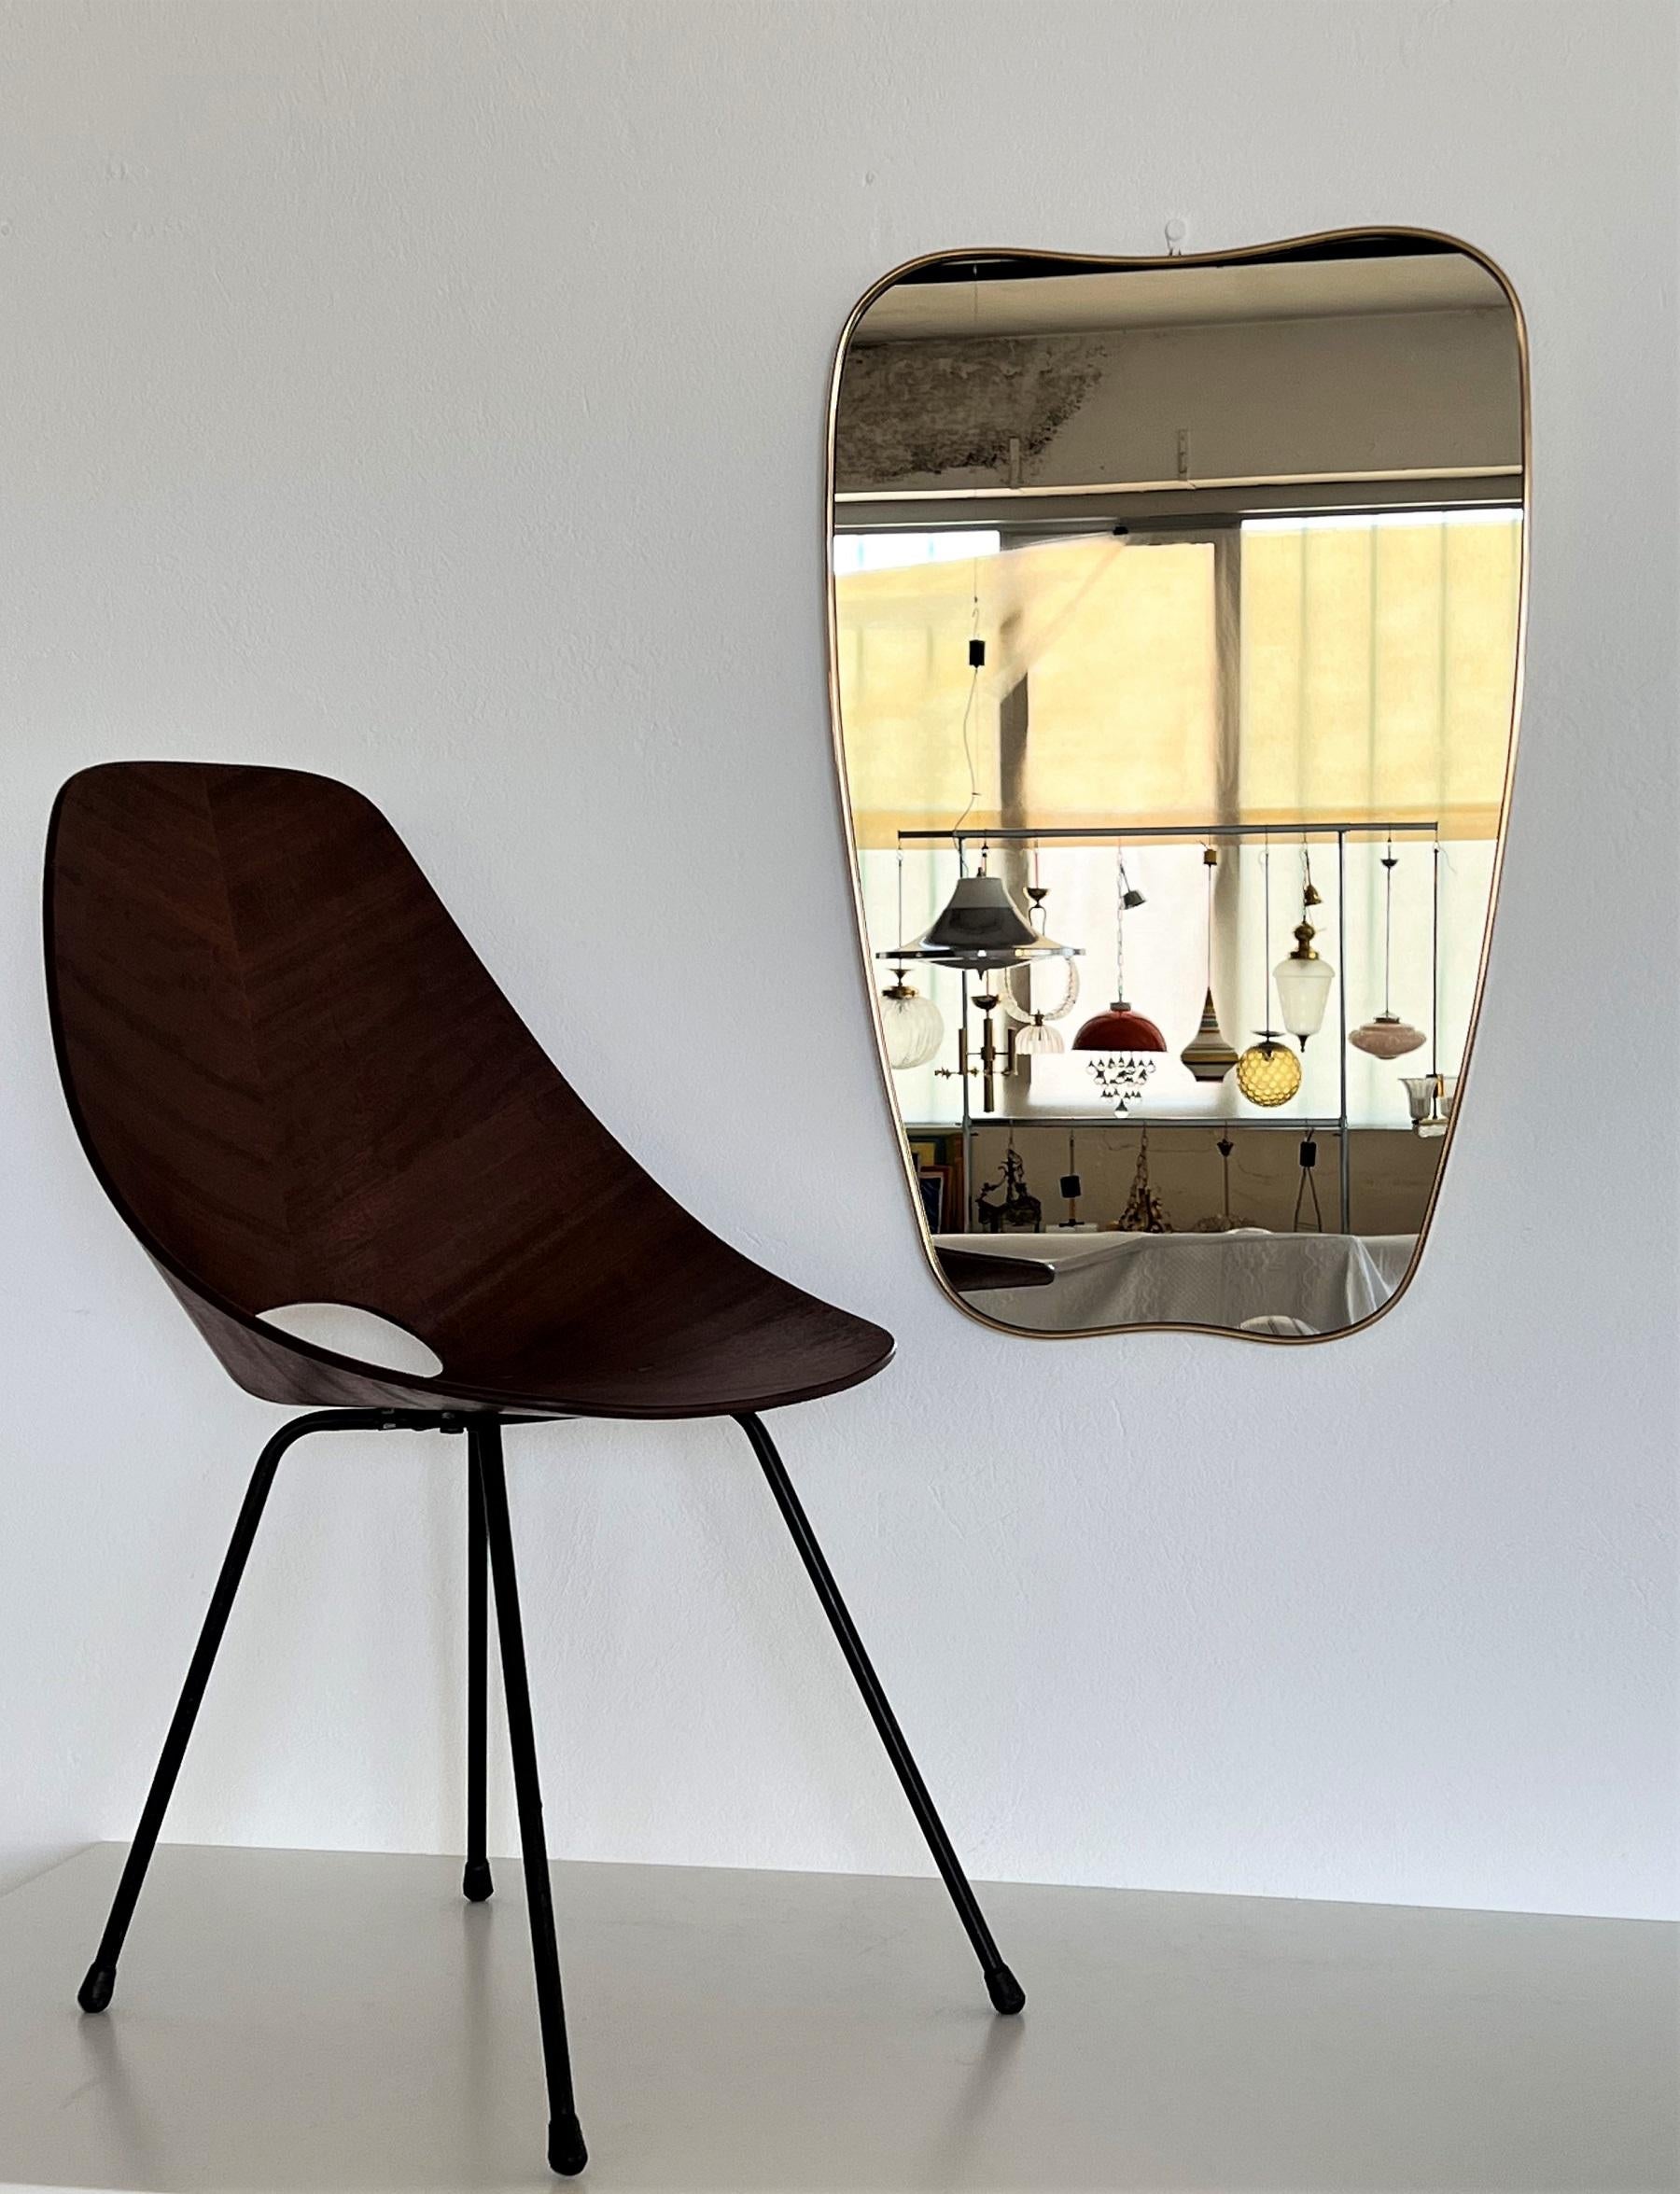 Beautiful and elegant, large vintage wall mirror with solid shiny brass frame and crystal mirror glass.
Made in Italy in the 1970s. Reminds to the model by Giò Ponti.
The brass frame was polished and therefore is in very nice shiny condition. 
The